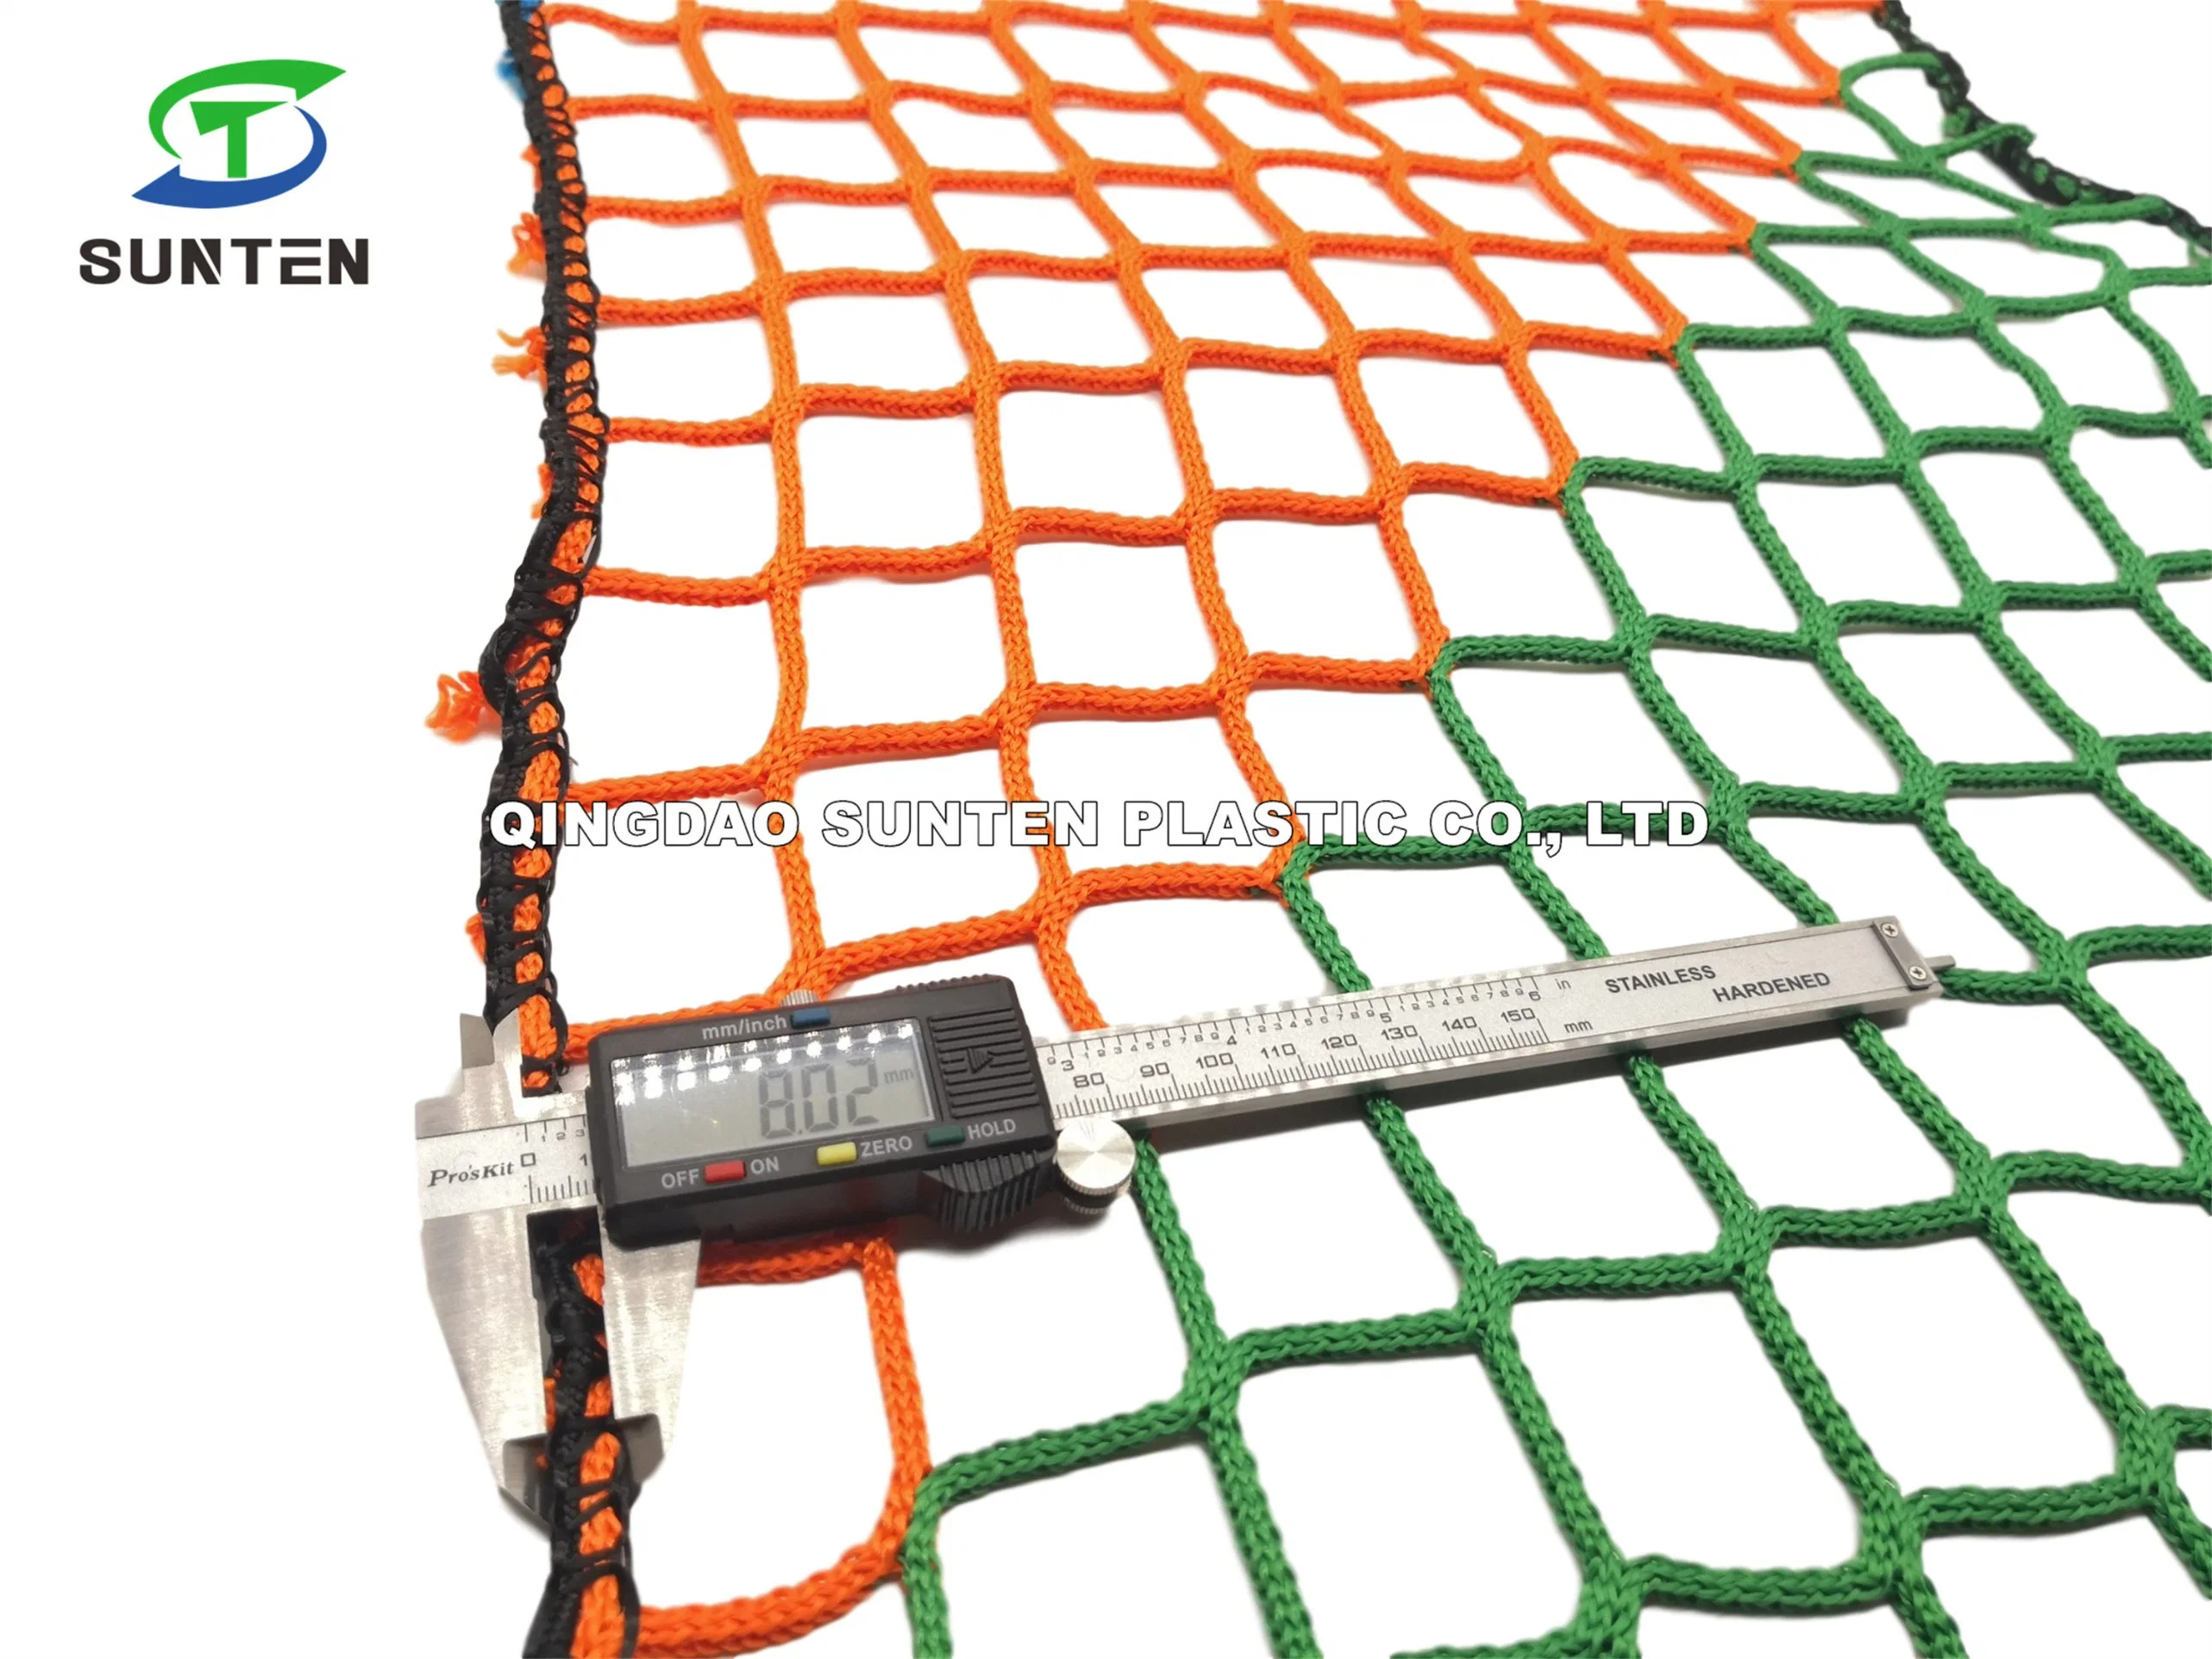 High Strength Durable 5cm Mesh Rainbow Color Polyester/Nylon Knotless Cargo Climbing Mesh, Container Mesh, Fall Arrest Mesh, Safety Catch Mesh Net